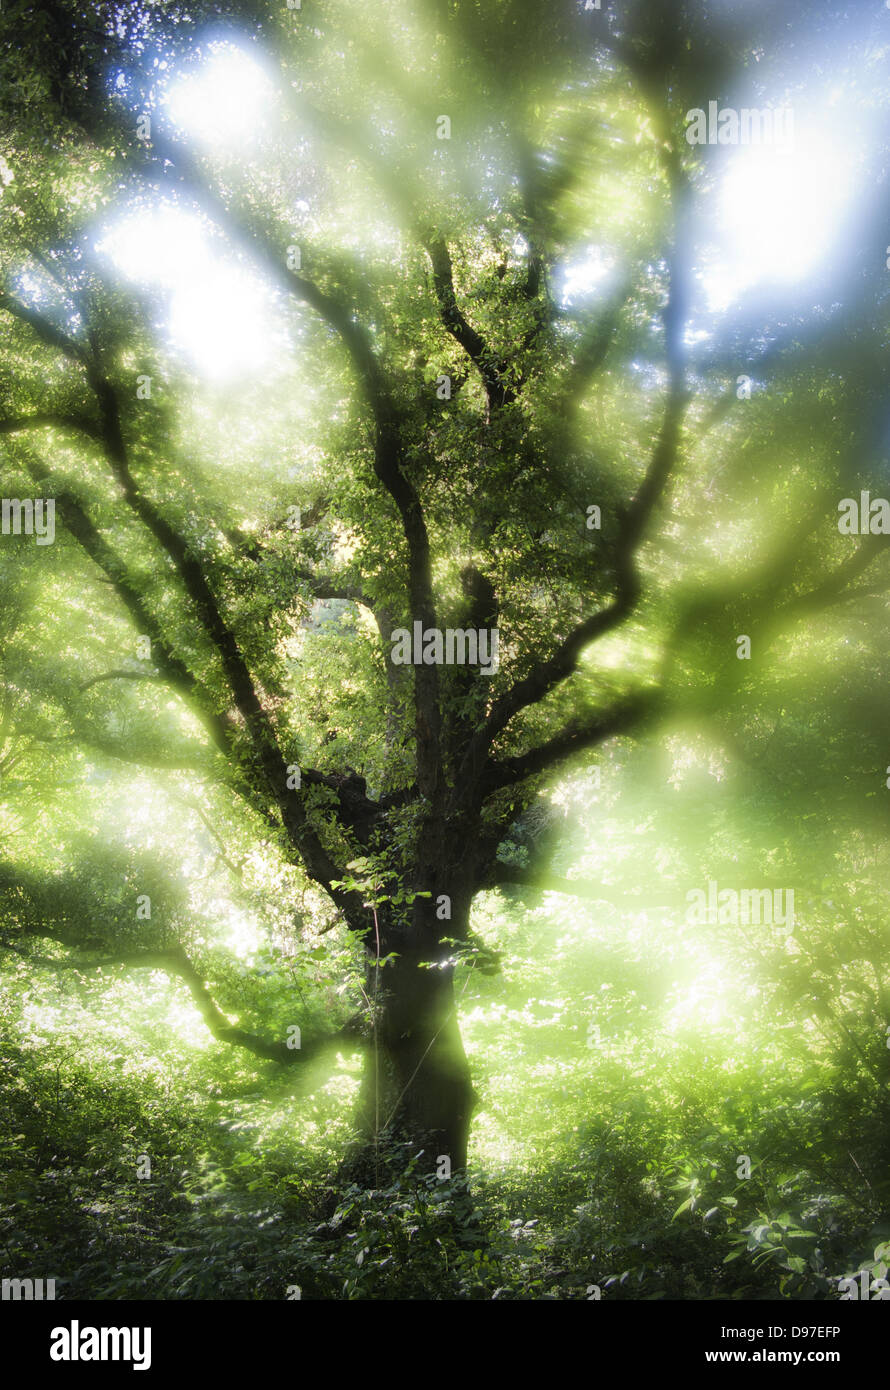 Tree with diffusion light effect Stock Photo